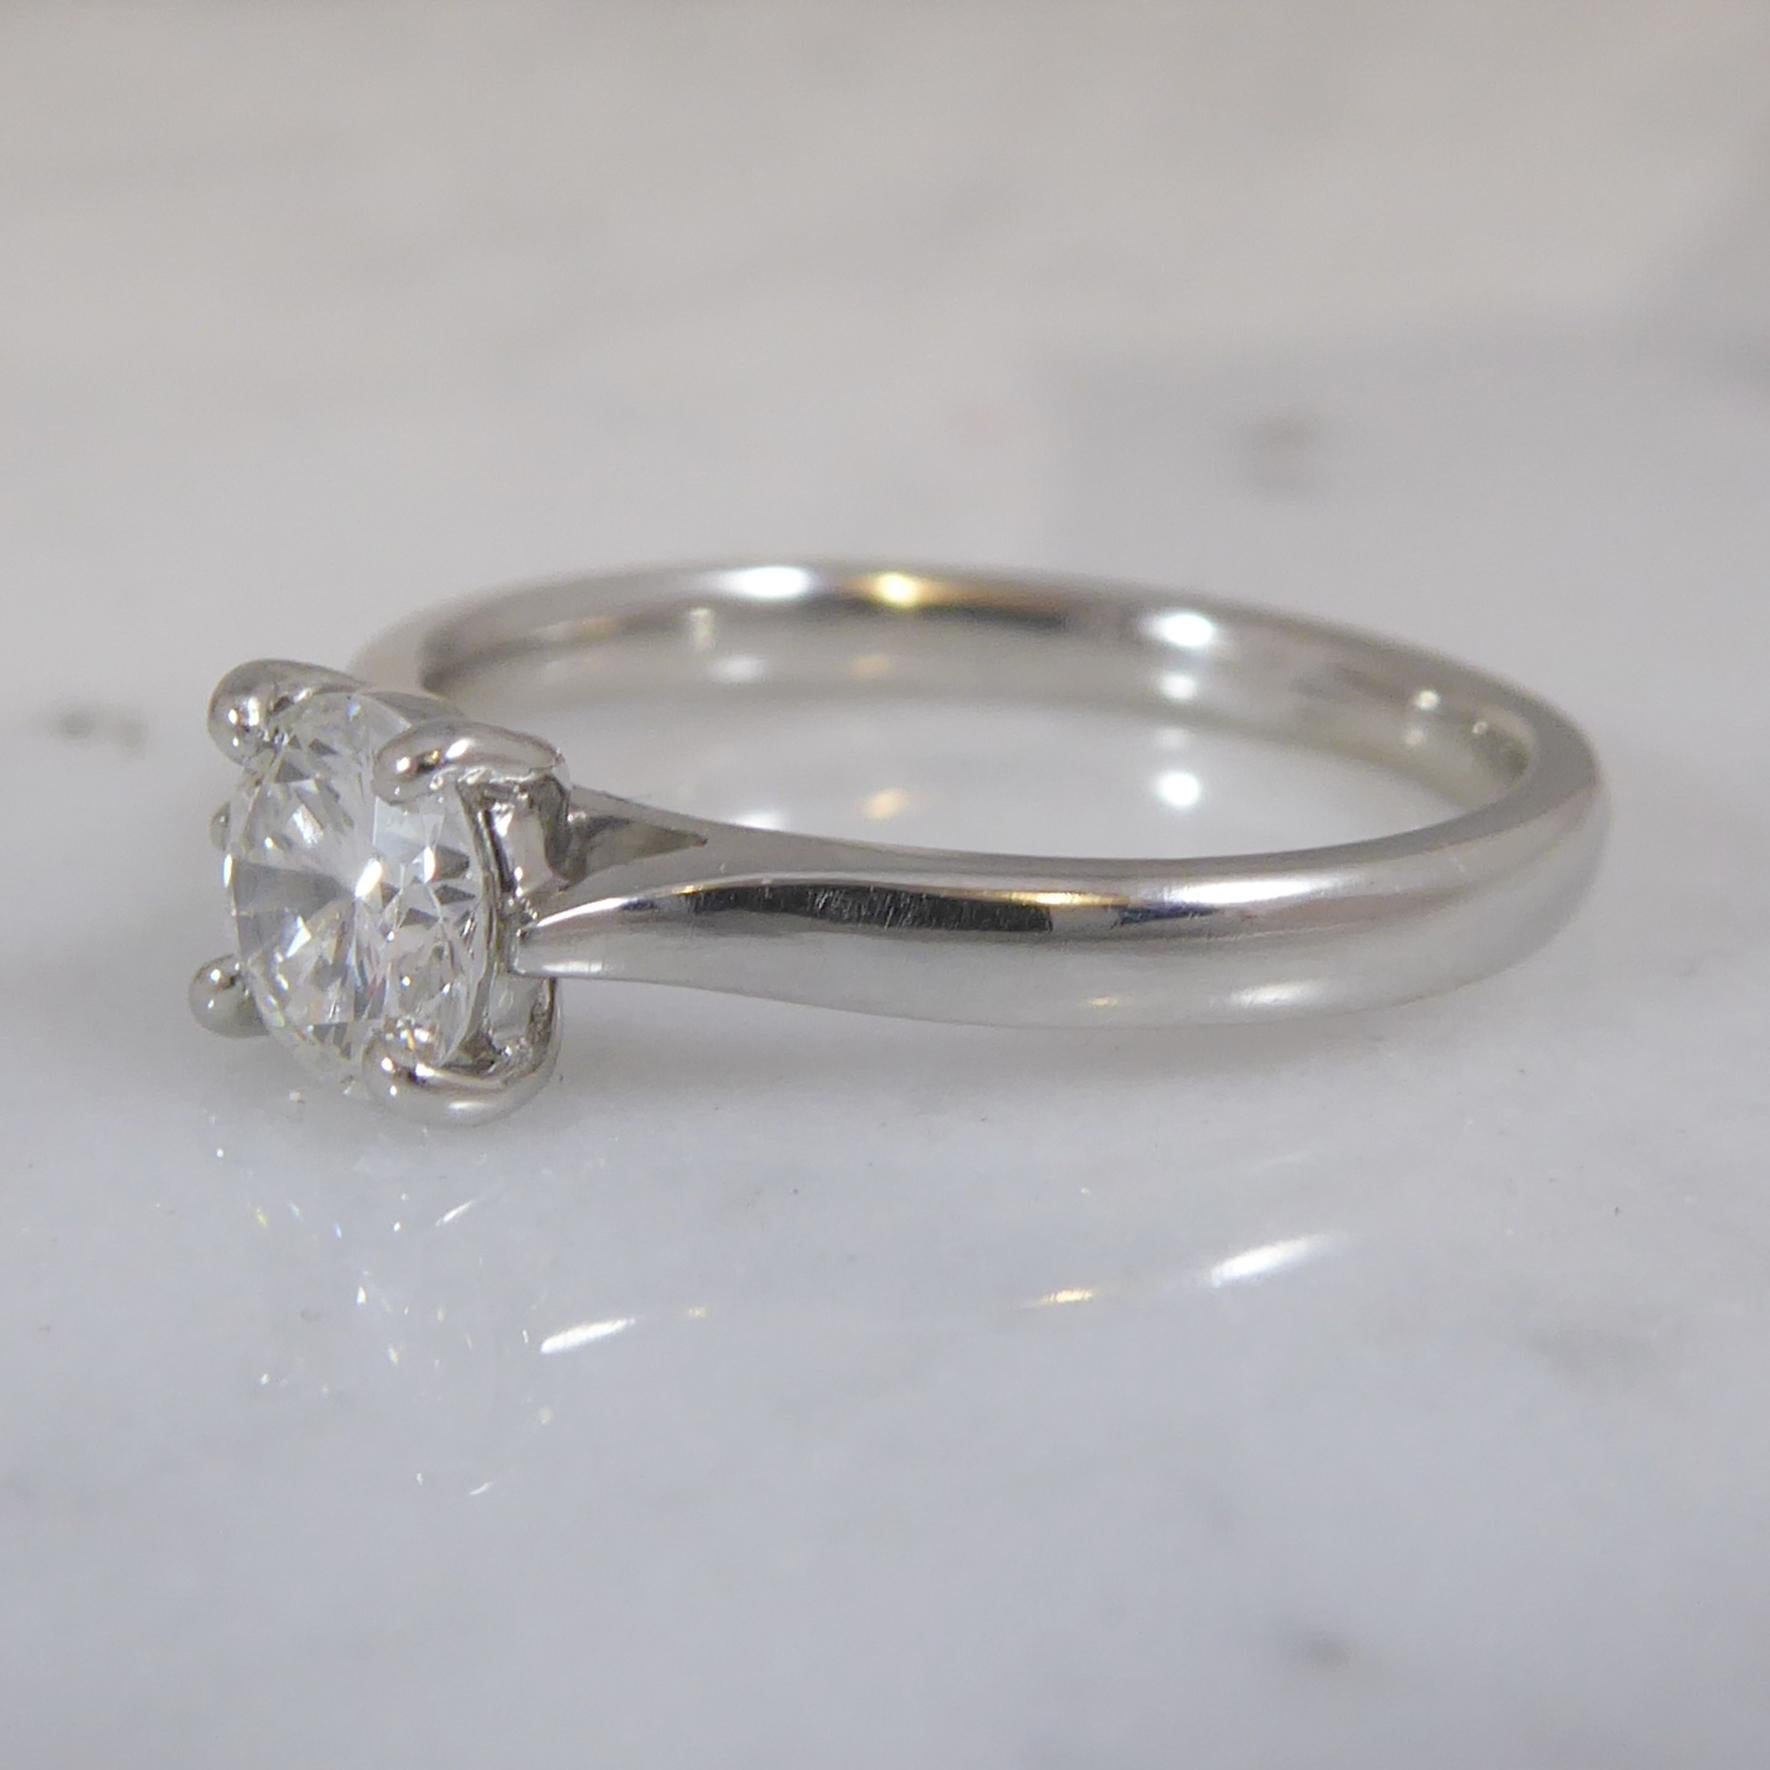 Modern Pre-Owned Diamond Solitaire Ring, with 0.52 Carat Diamond, Platinum Band